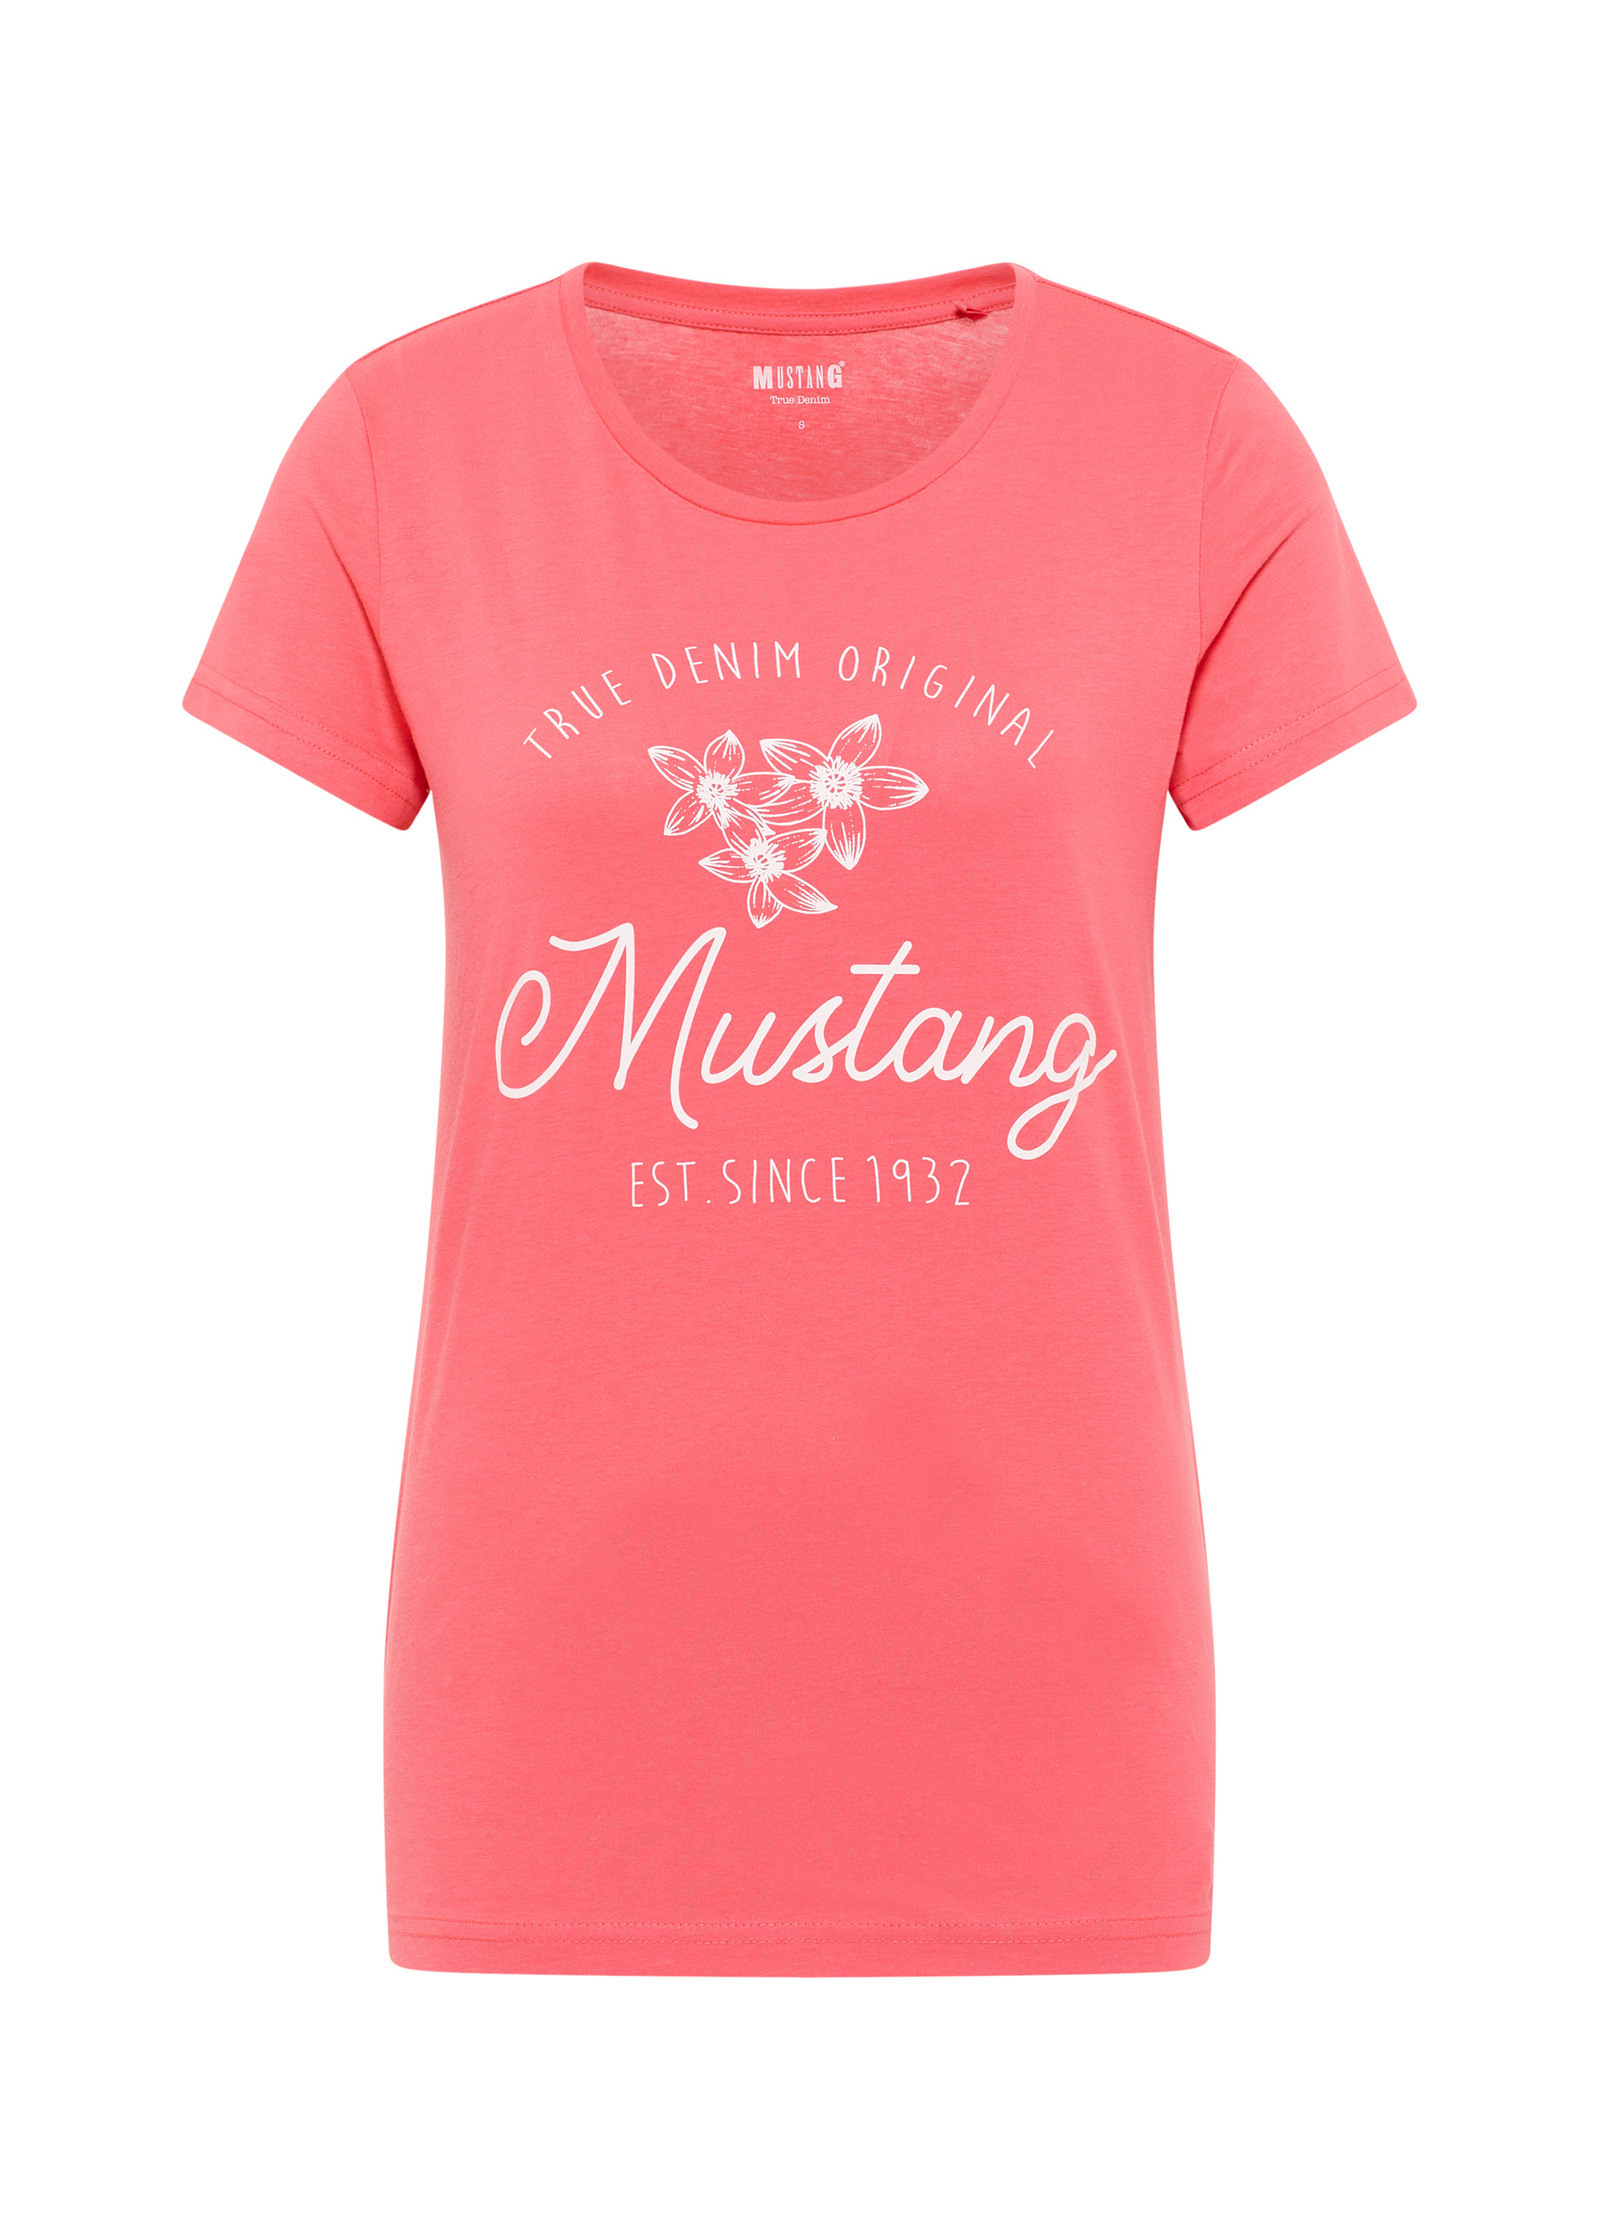 Of Mustang L Size Print Rose C Sharon Alina - Jeans® Style